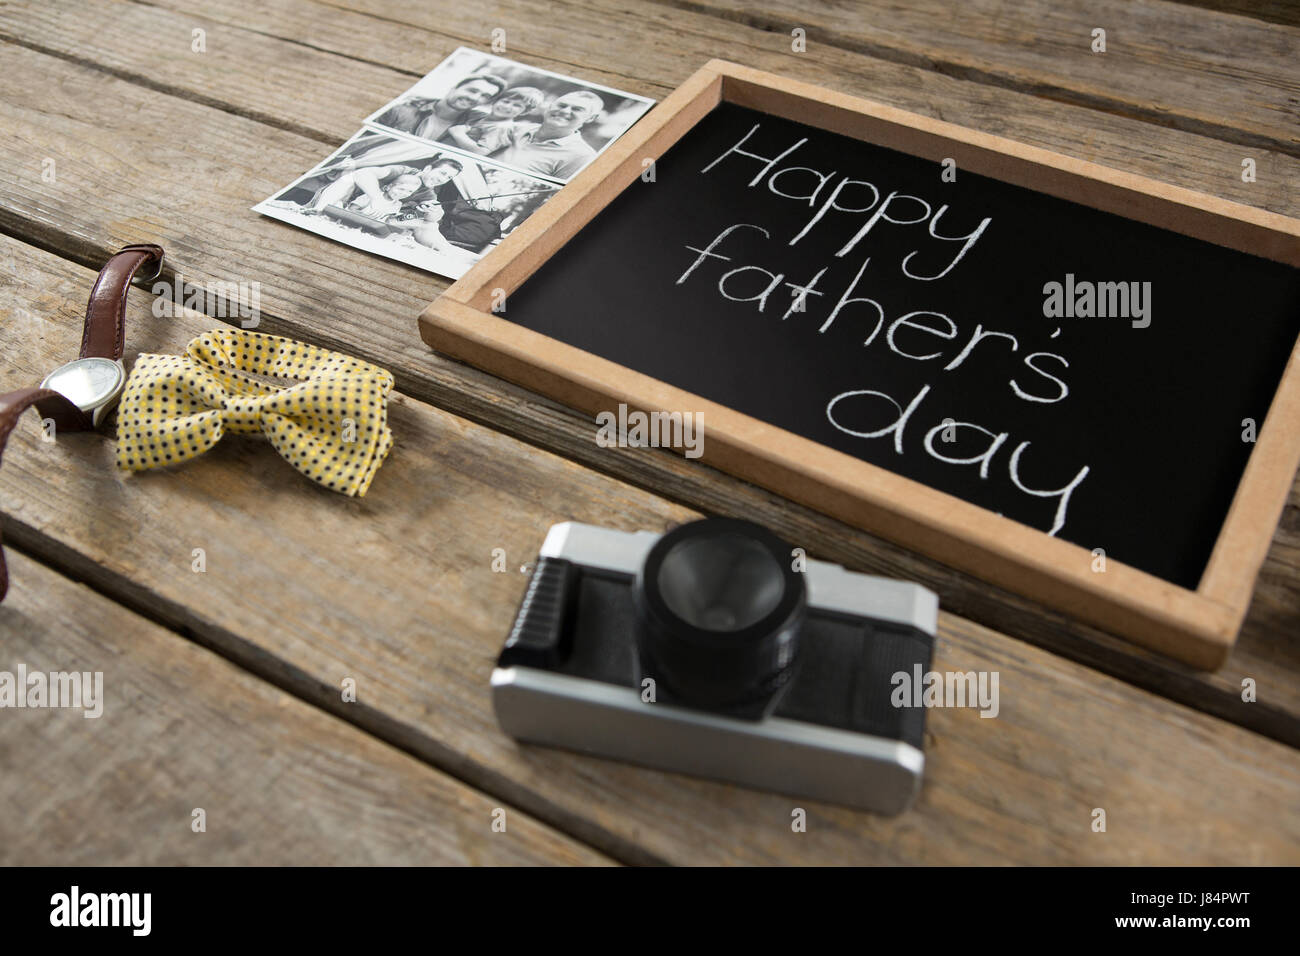 High angle view of slate with text by photographs and camera on wooden table Stock Photo